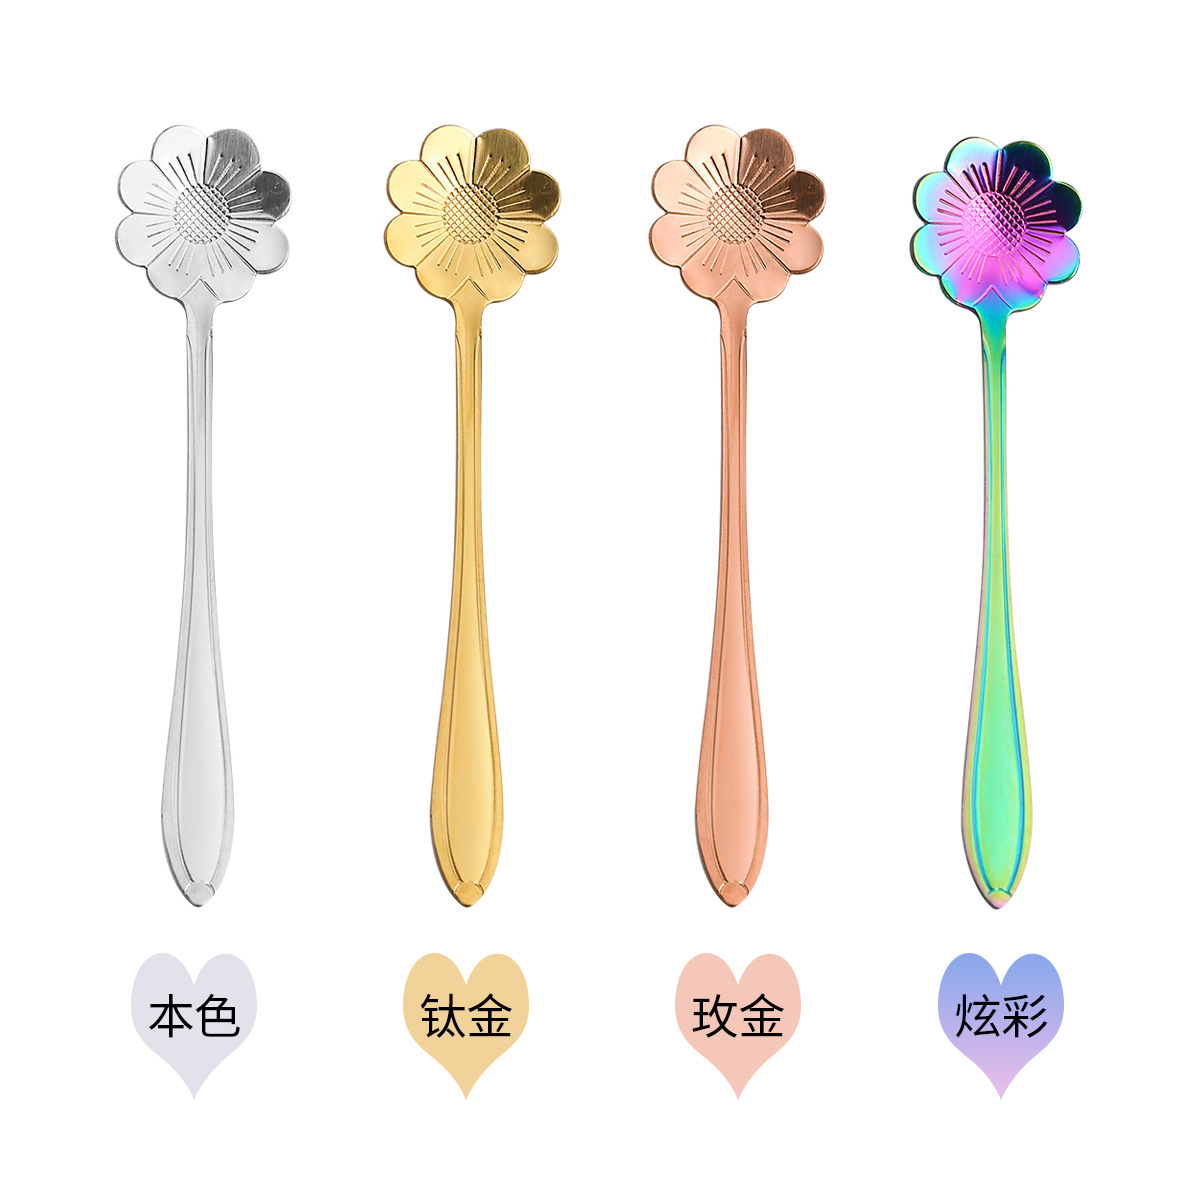 L Gold-Plated Flowers Spoon Stainless Steel Coffee Spoon Rose Spoon Creative Scented Tea Cherry Blossom Spoon Wedding Gift